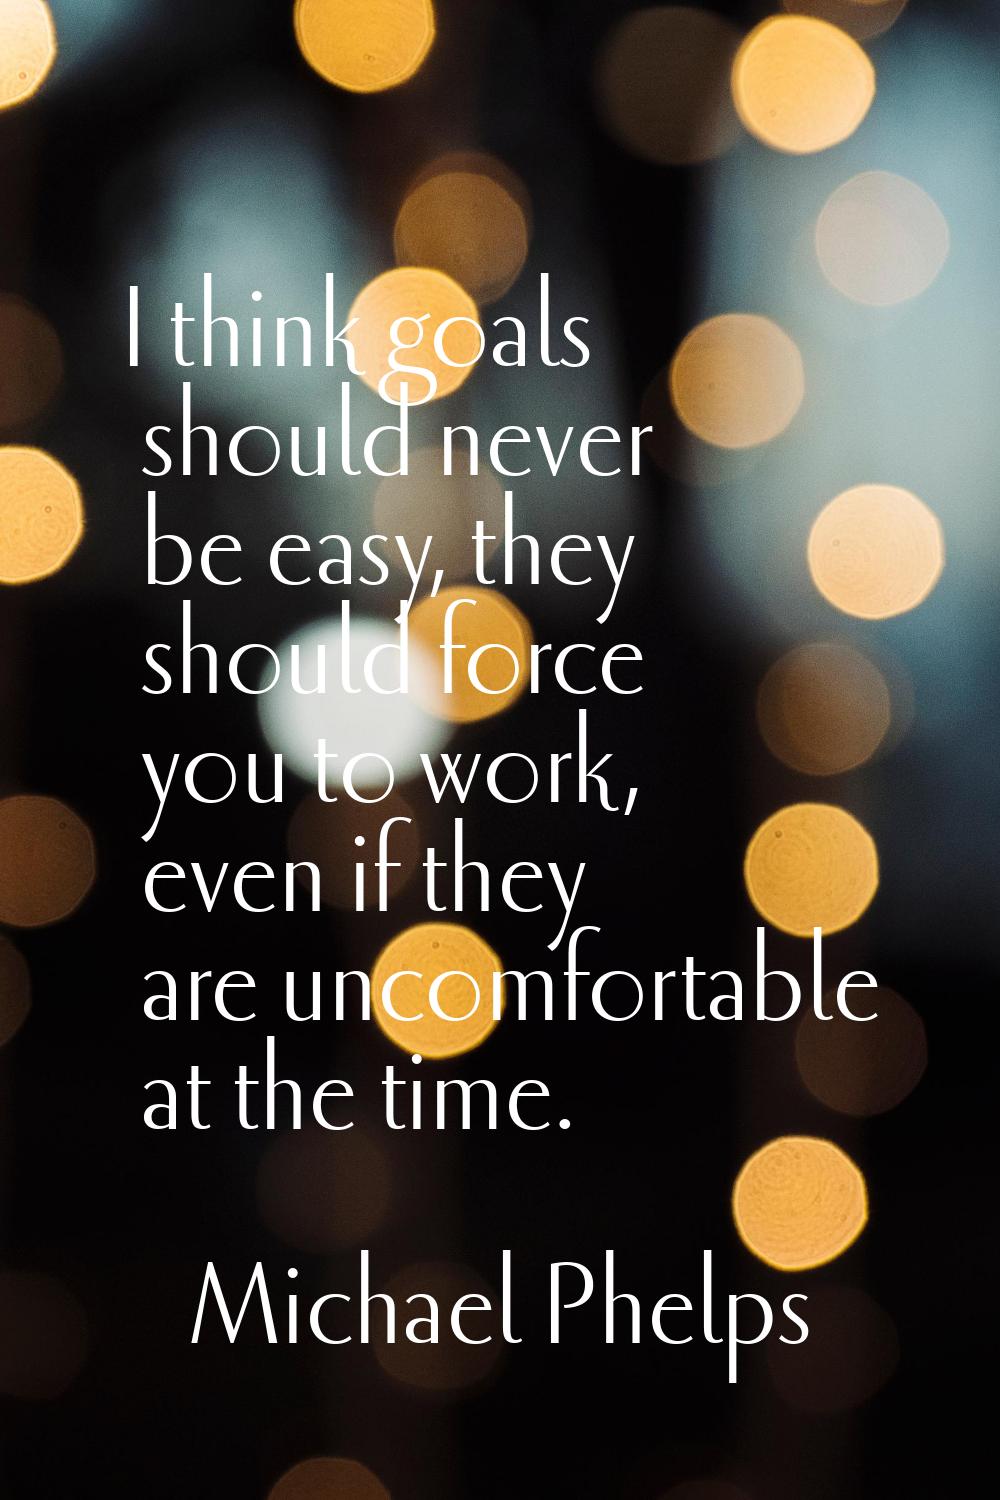 I think goals should never be easy, they should force you to work, even if they are uncomfortable a